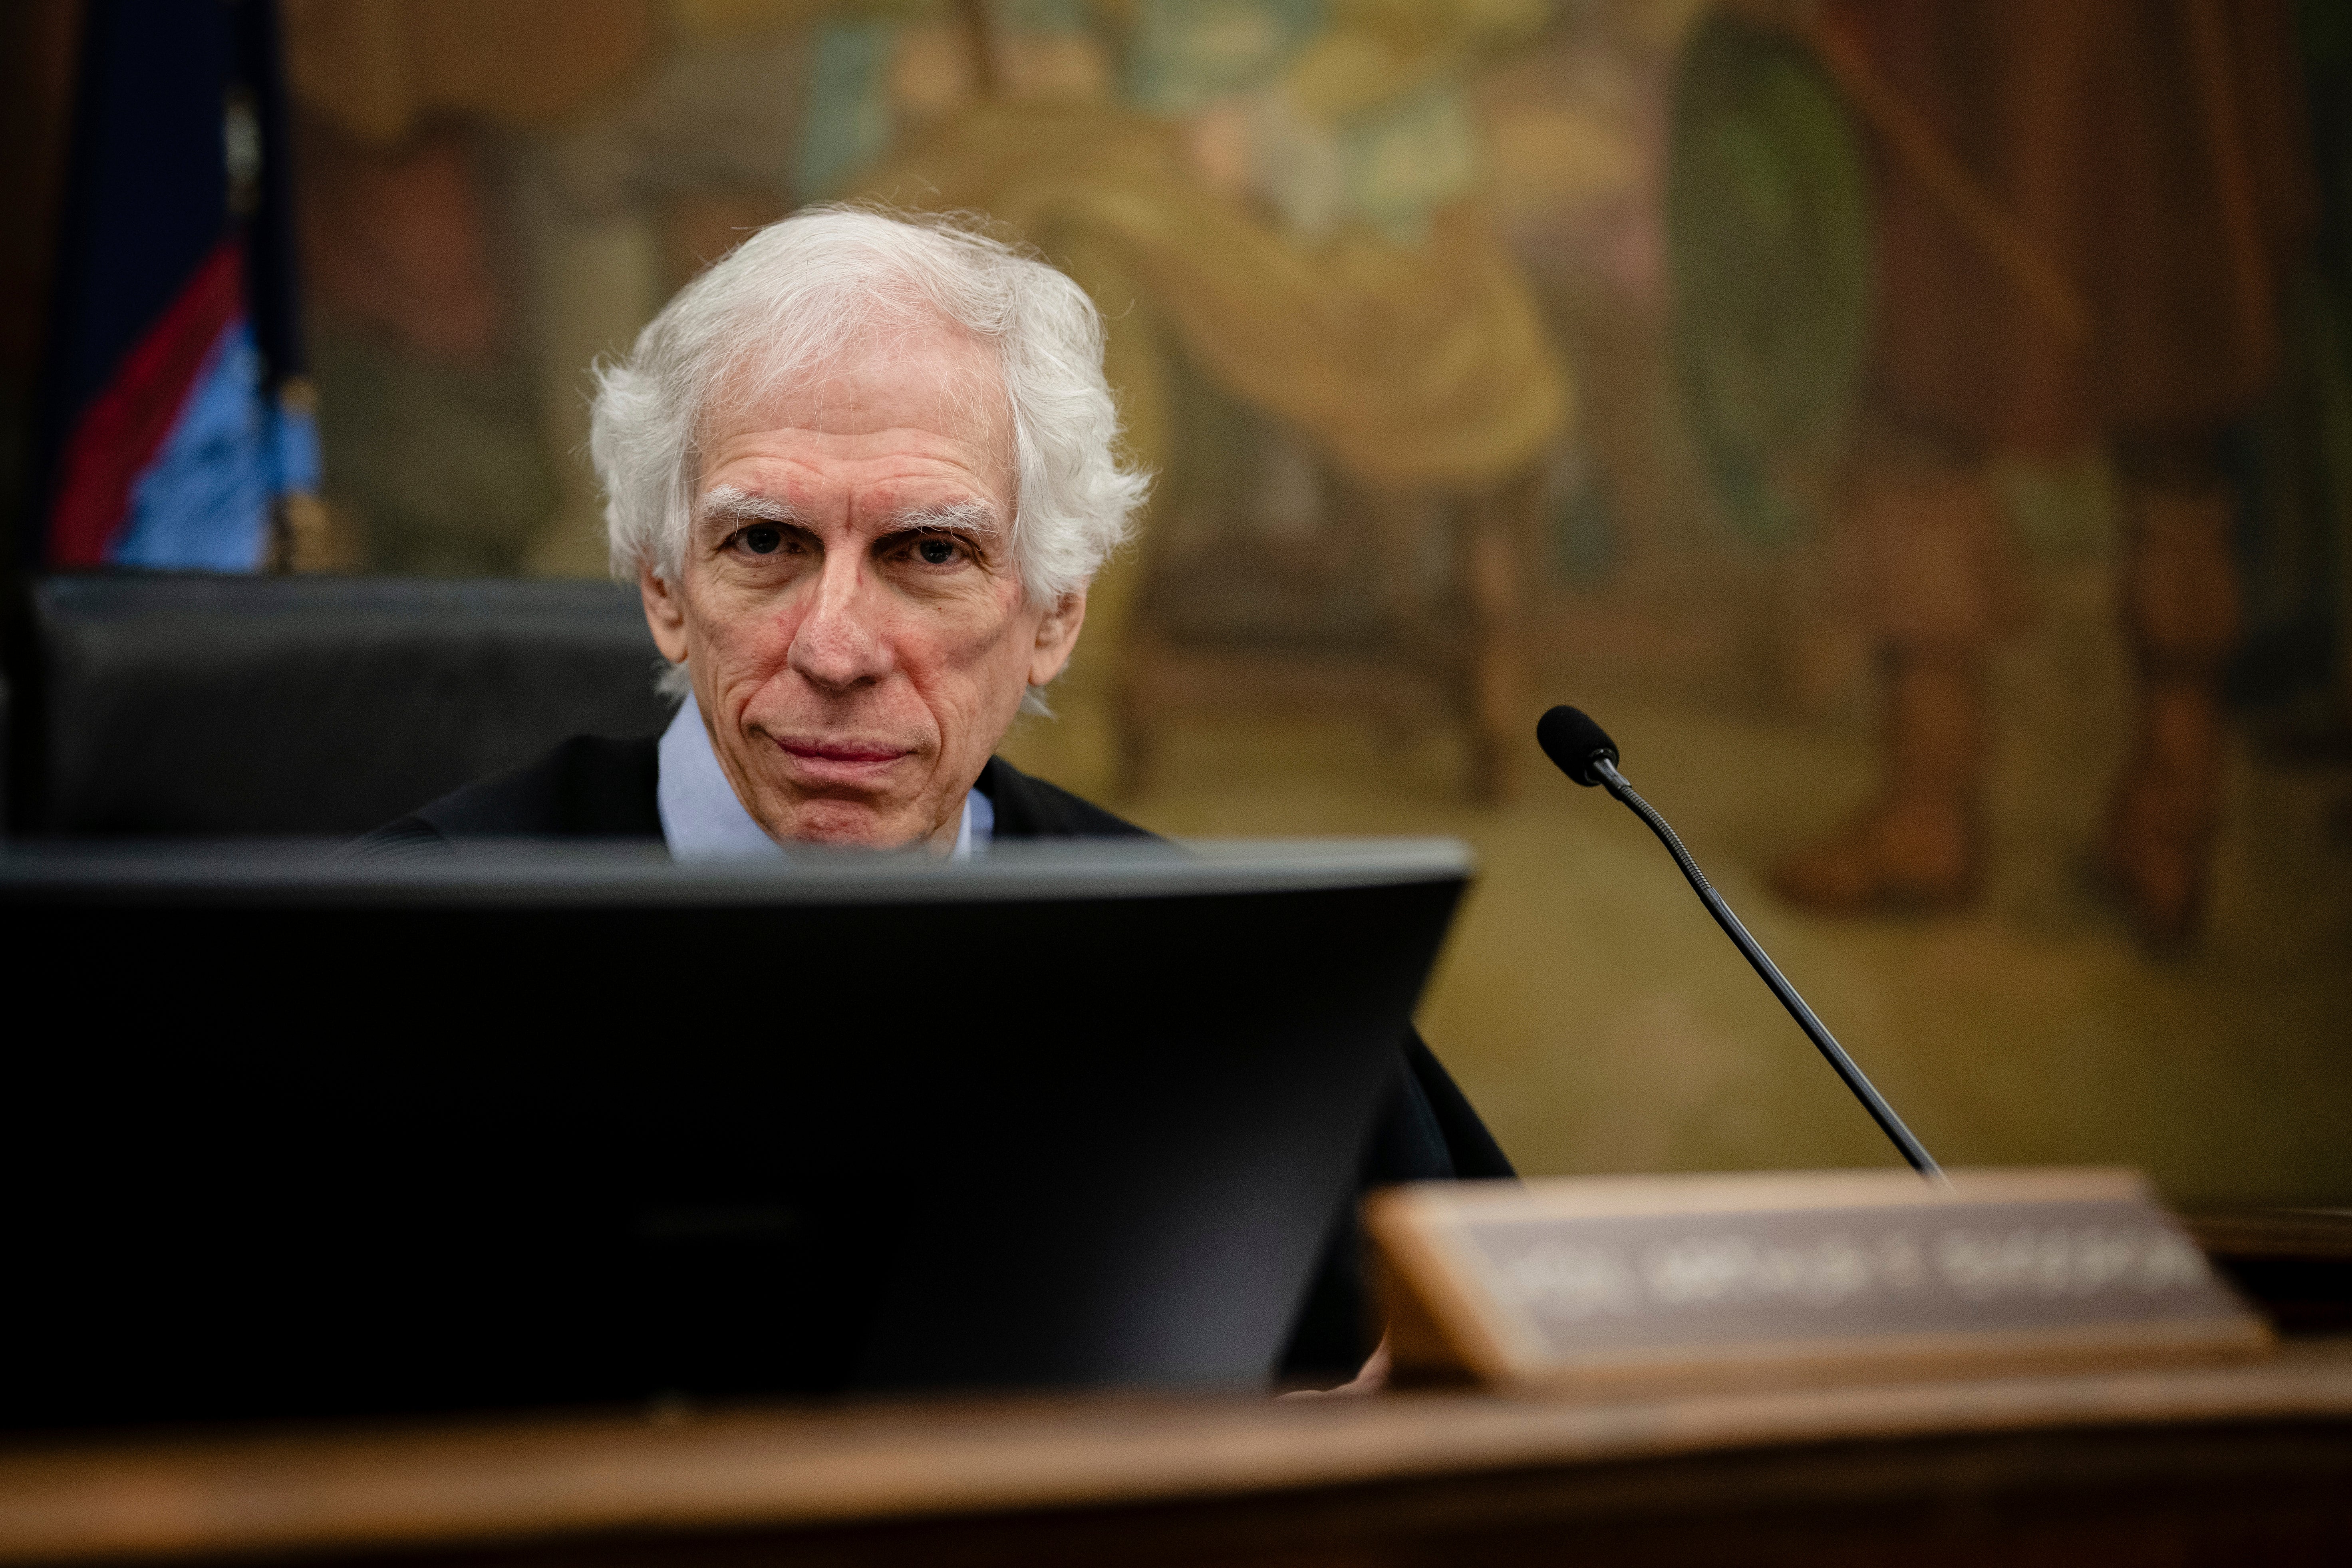 Justice Arthur Engoron presides over Donald Trump Jr's testimony in his family's civil fraud case at the New York State Supreme Court on 13 November